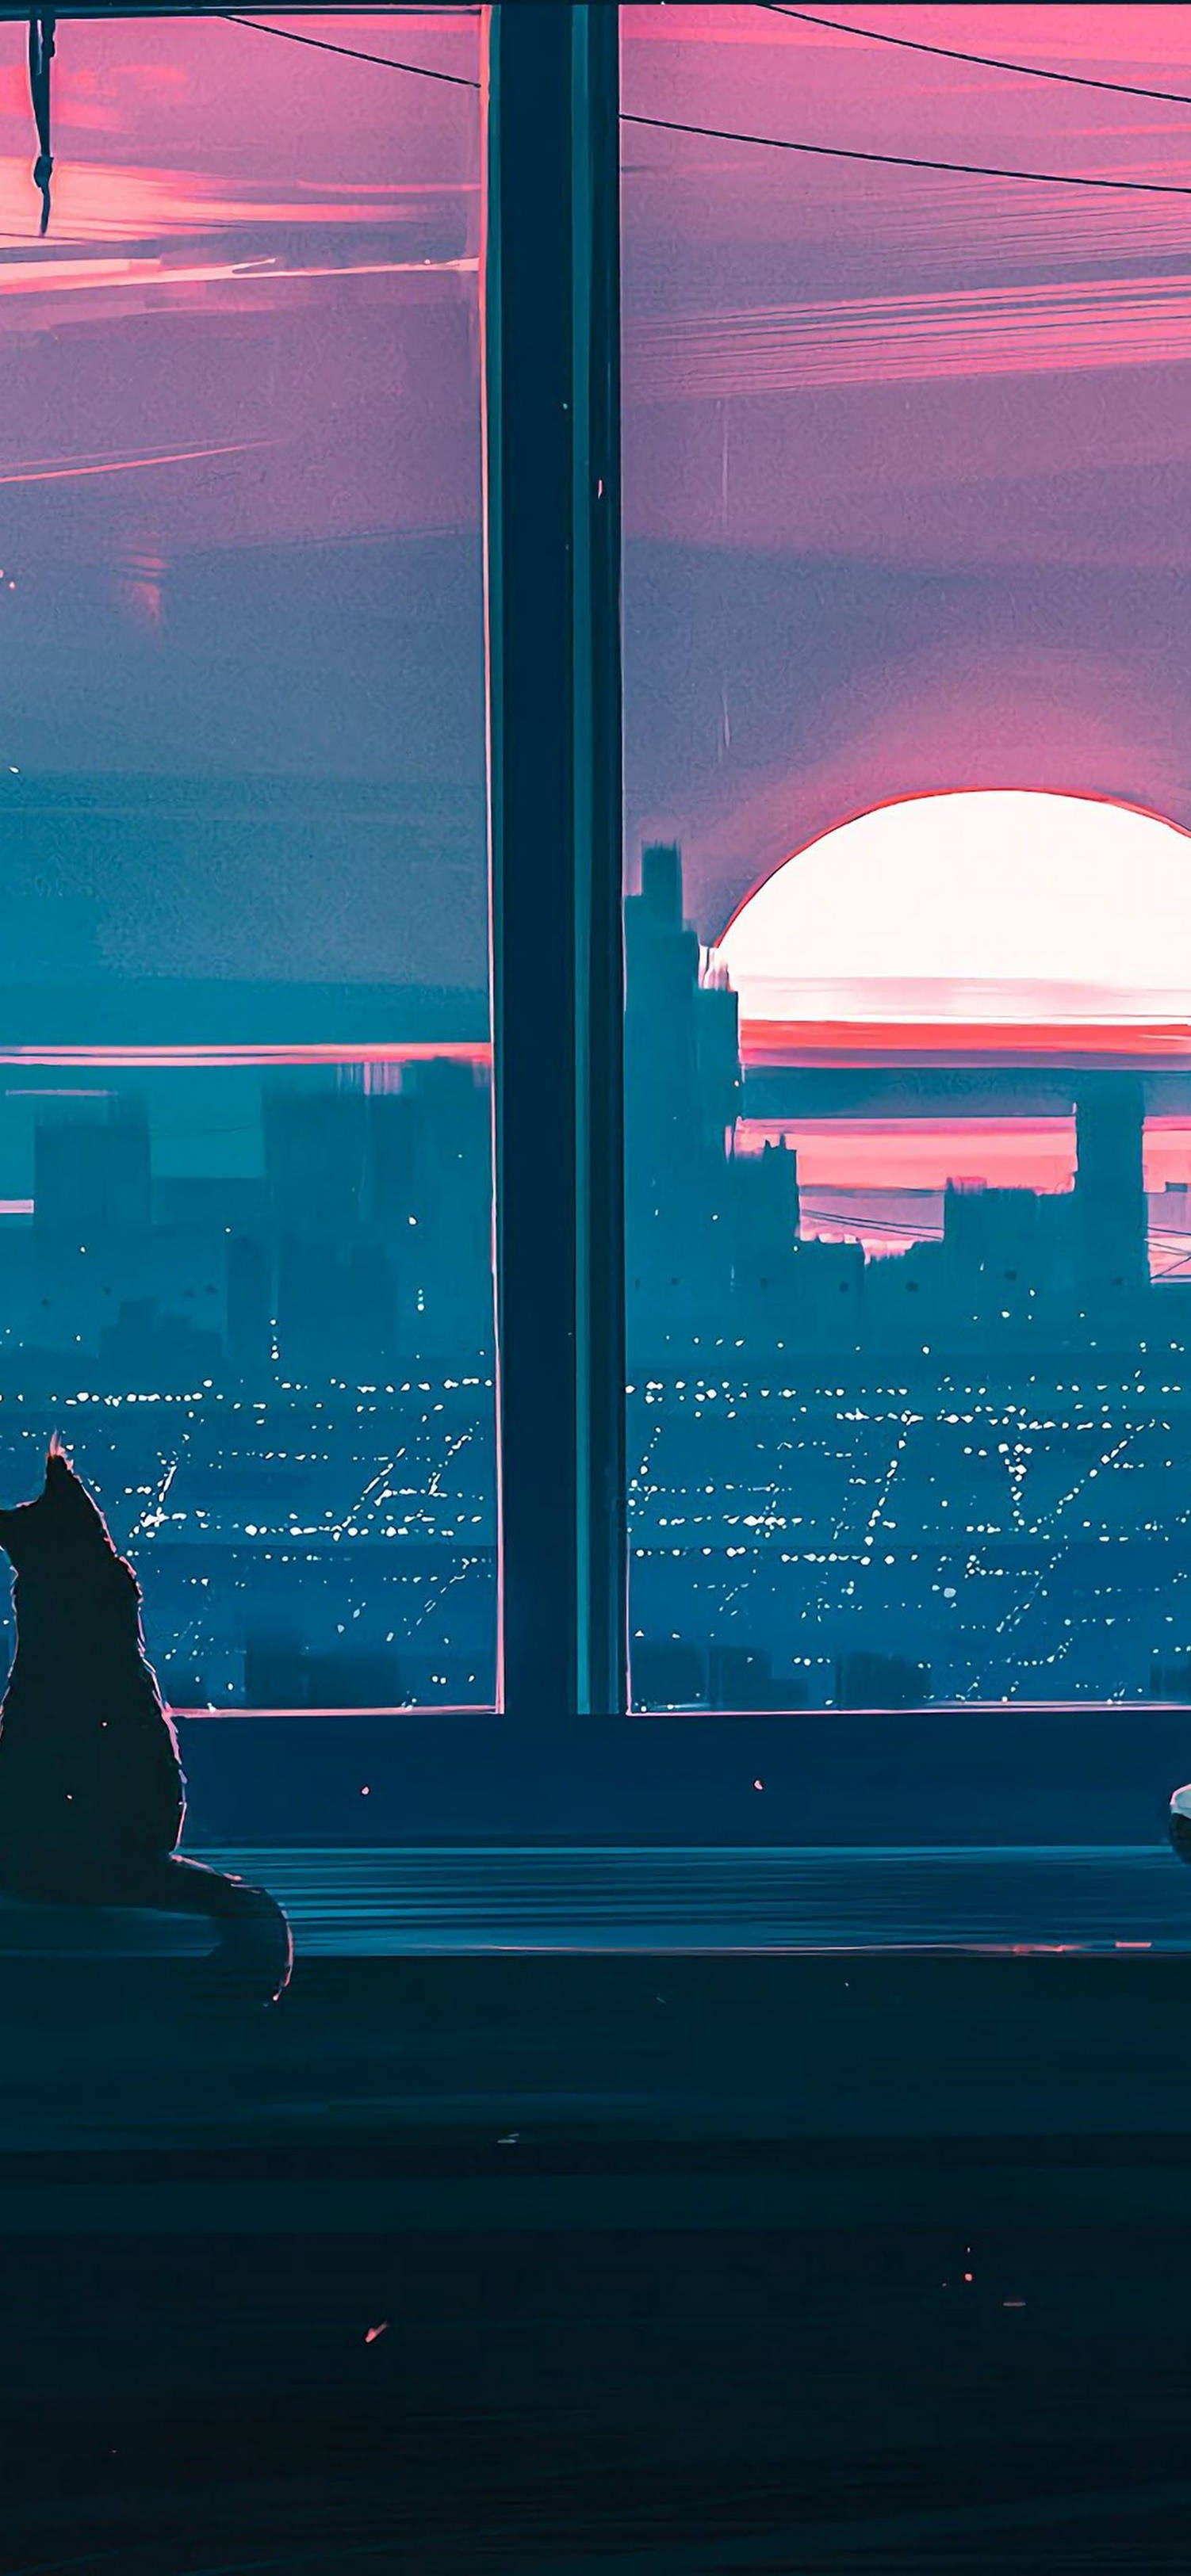 Entrancing Sunset Anime Aesthetics For Iphone - A Cat By The Window Background